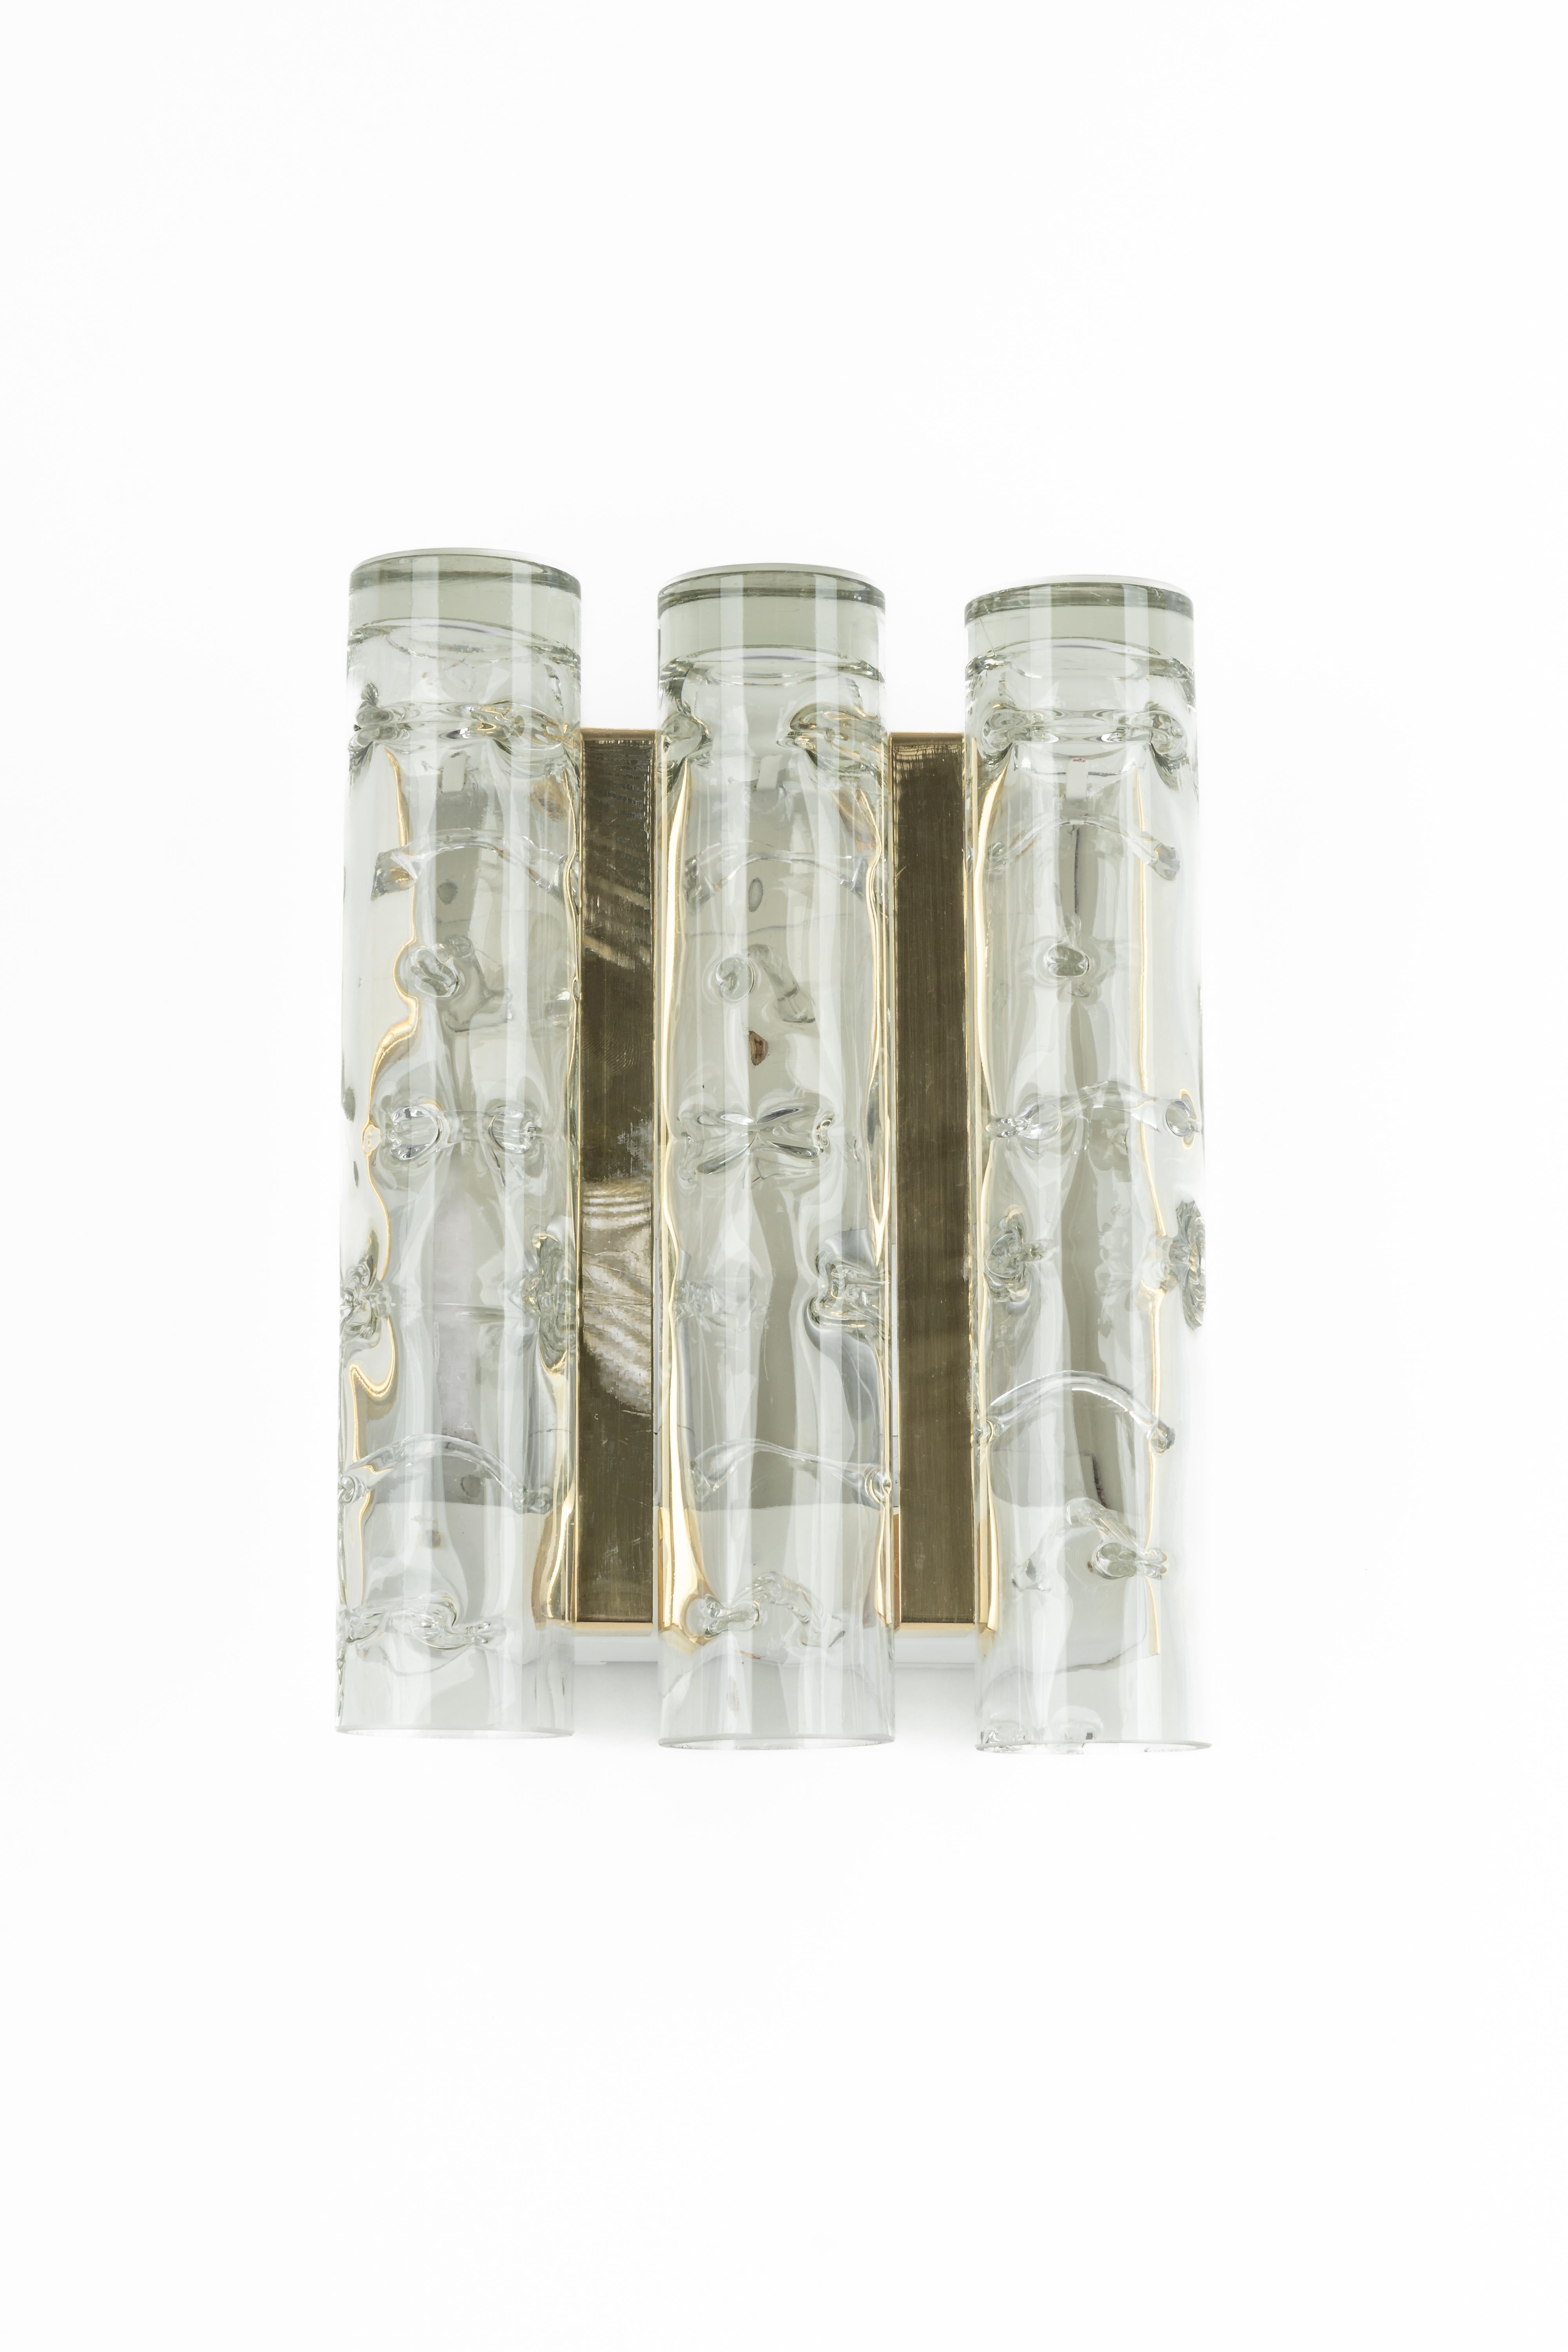 Large Brass Murano Glass Wall Sconce by Doria, Germany, 1960s For Sale 5